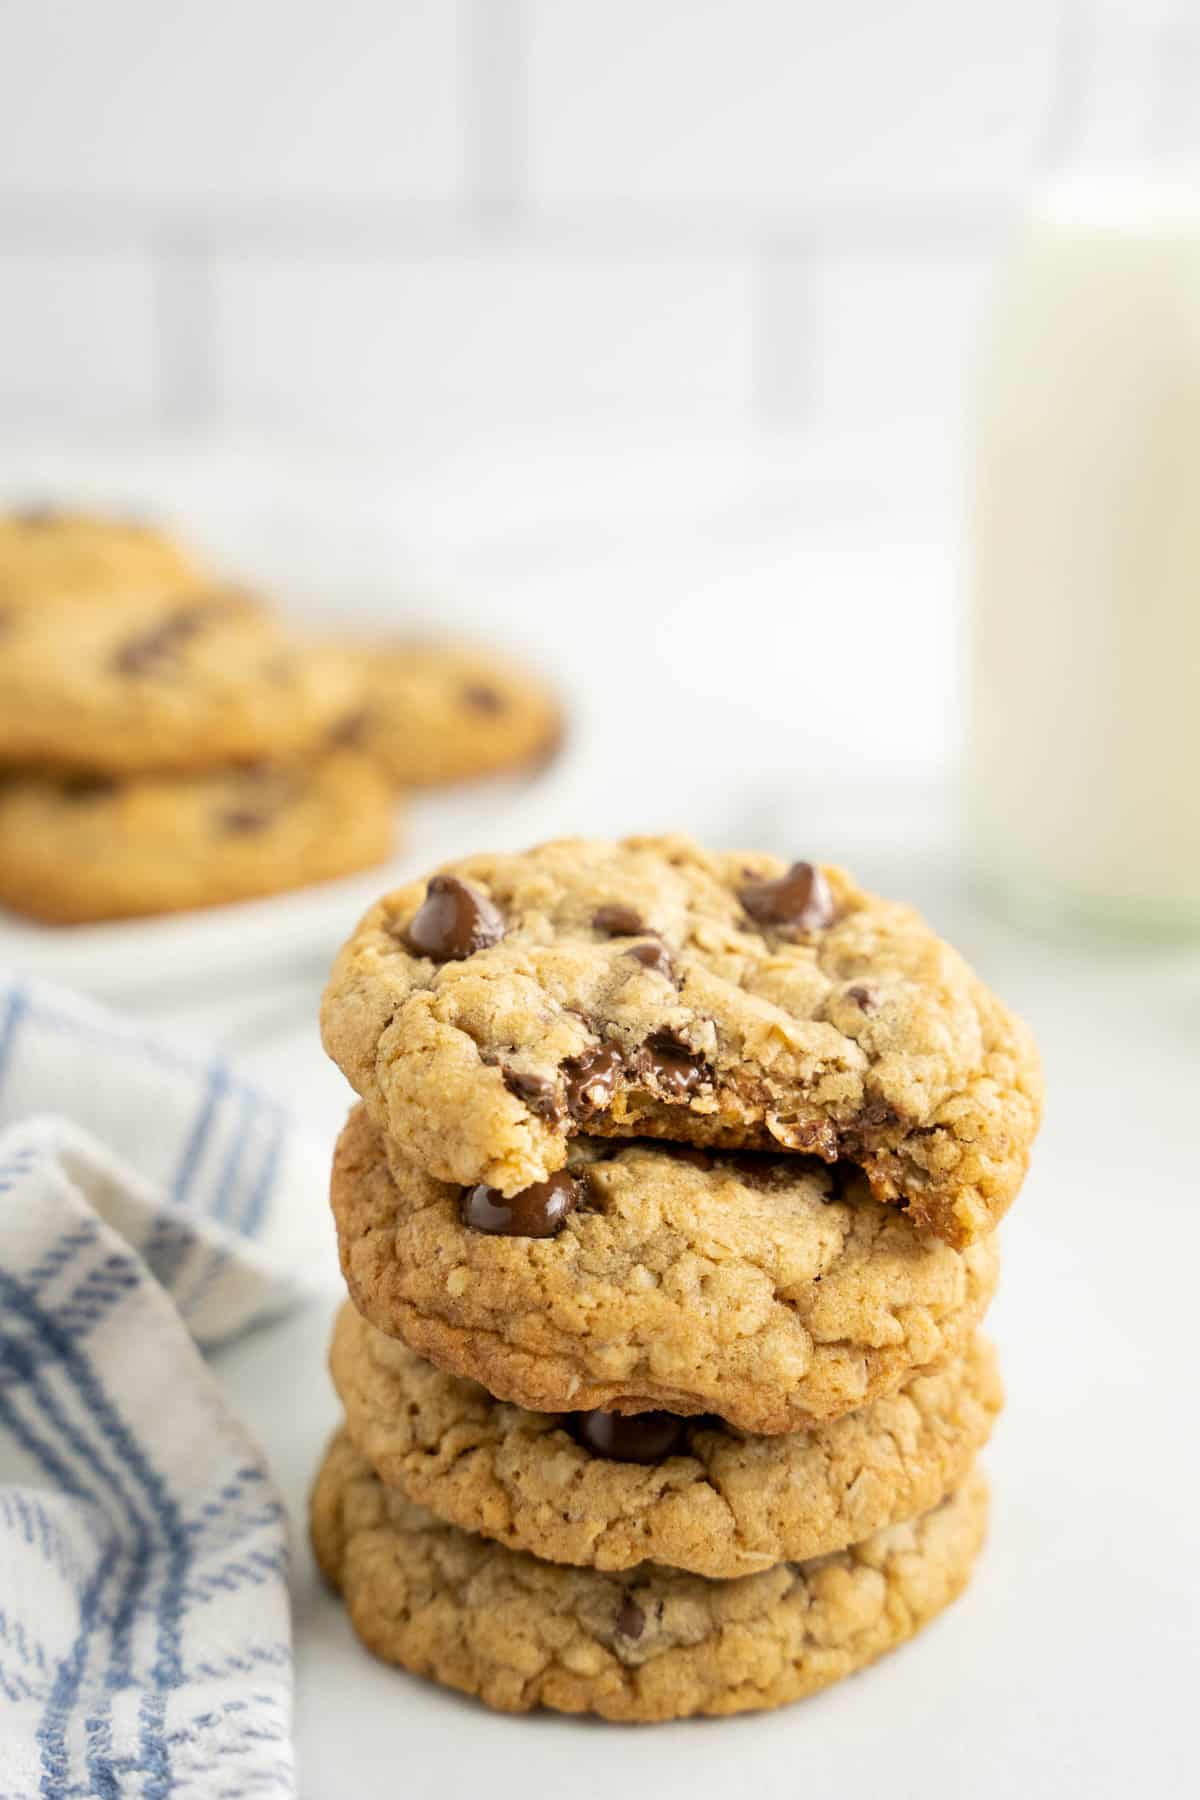 Chewy Oatmeal Chocolate Chip Cookies Recipe